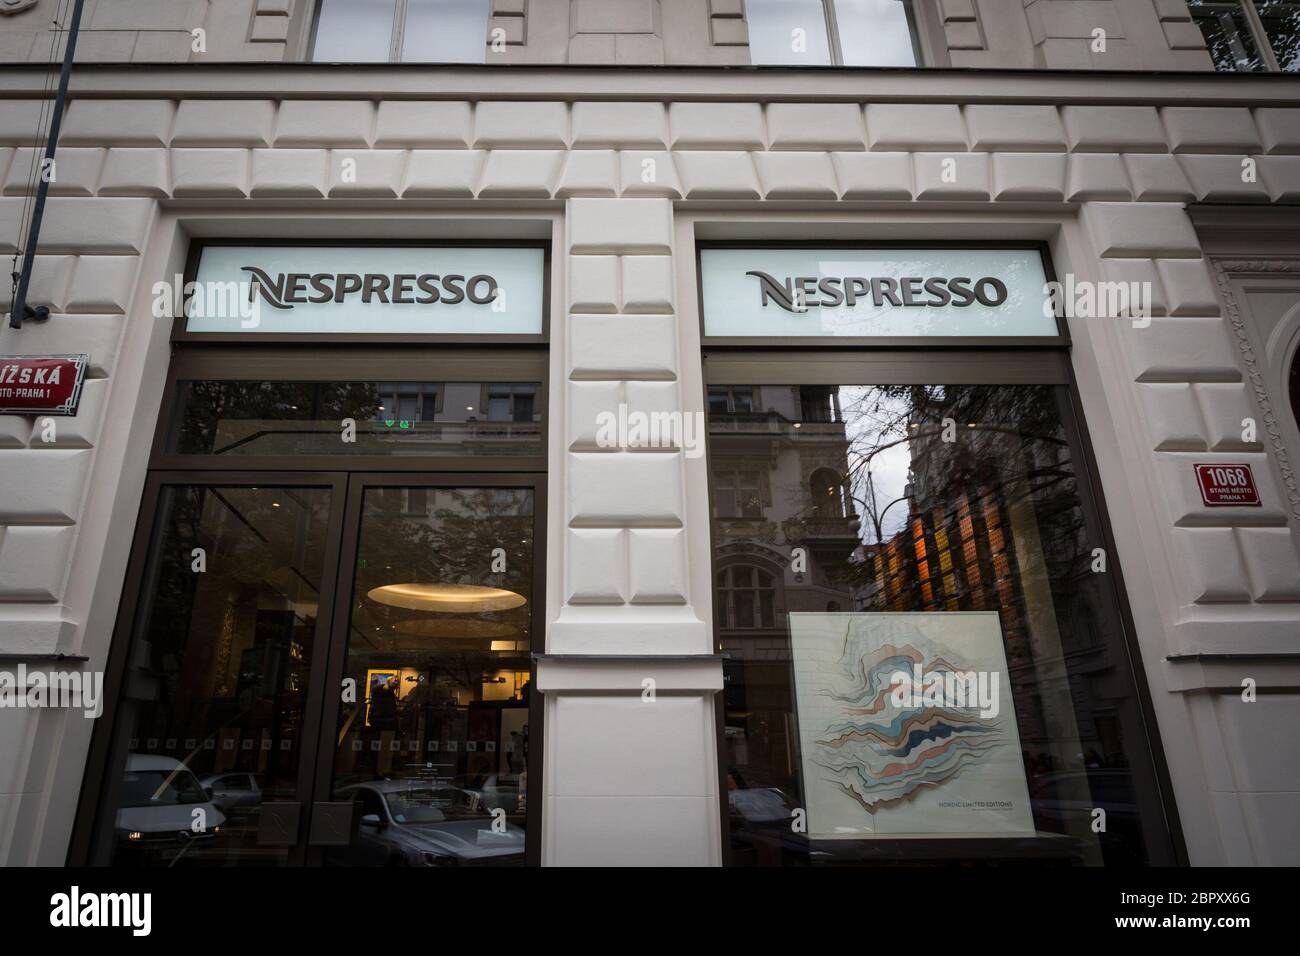 PRAGUE, CZECHIA - NOVEMBER 1, 2019: Nespresso logo in front of their boutique for Prague. Nespresso is a brand of Nestle group selling cafe and coffee Stock Photo